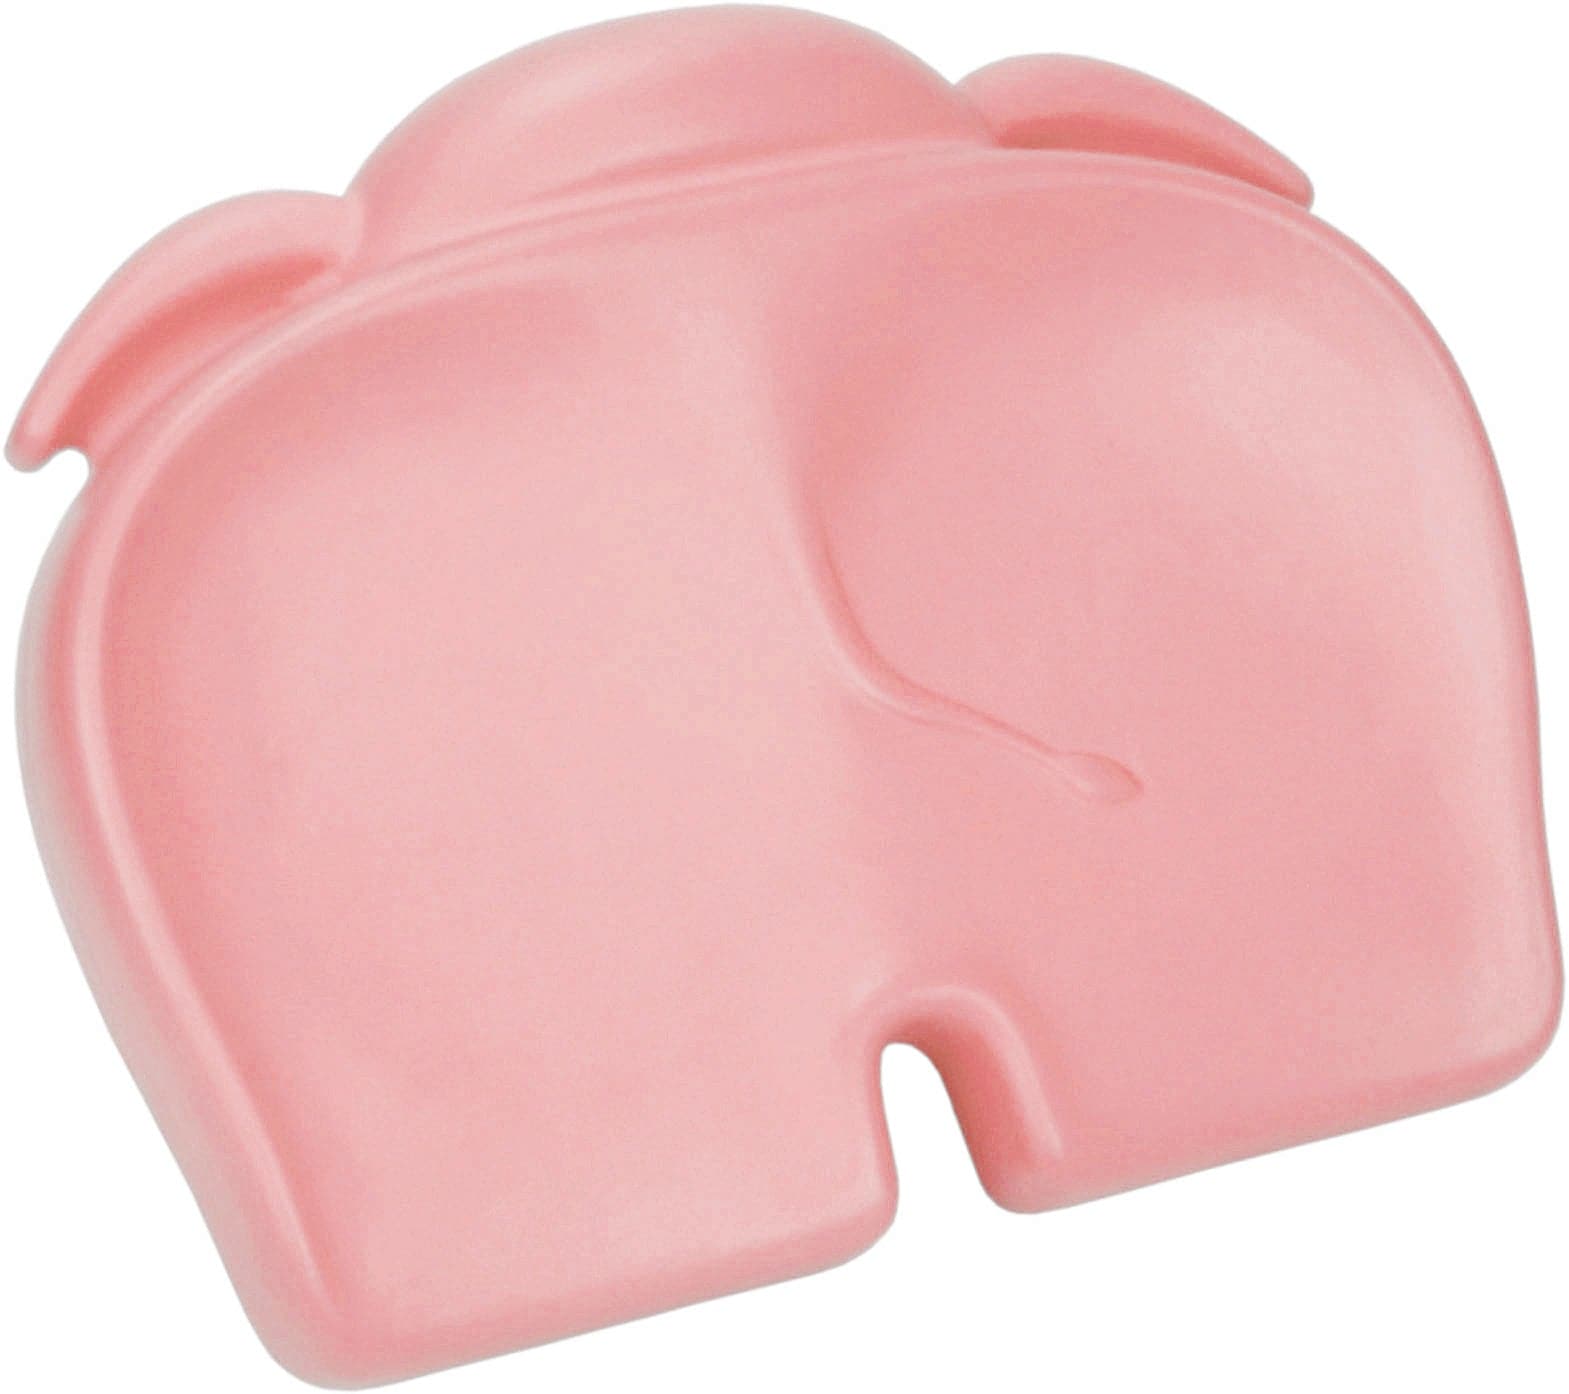 Bumbo Elipad - Pink - For Your Little One